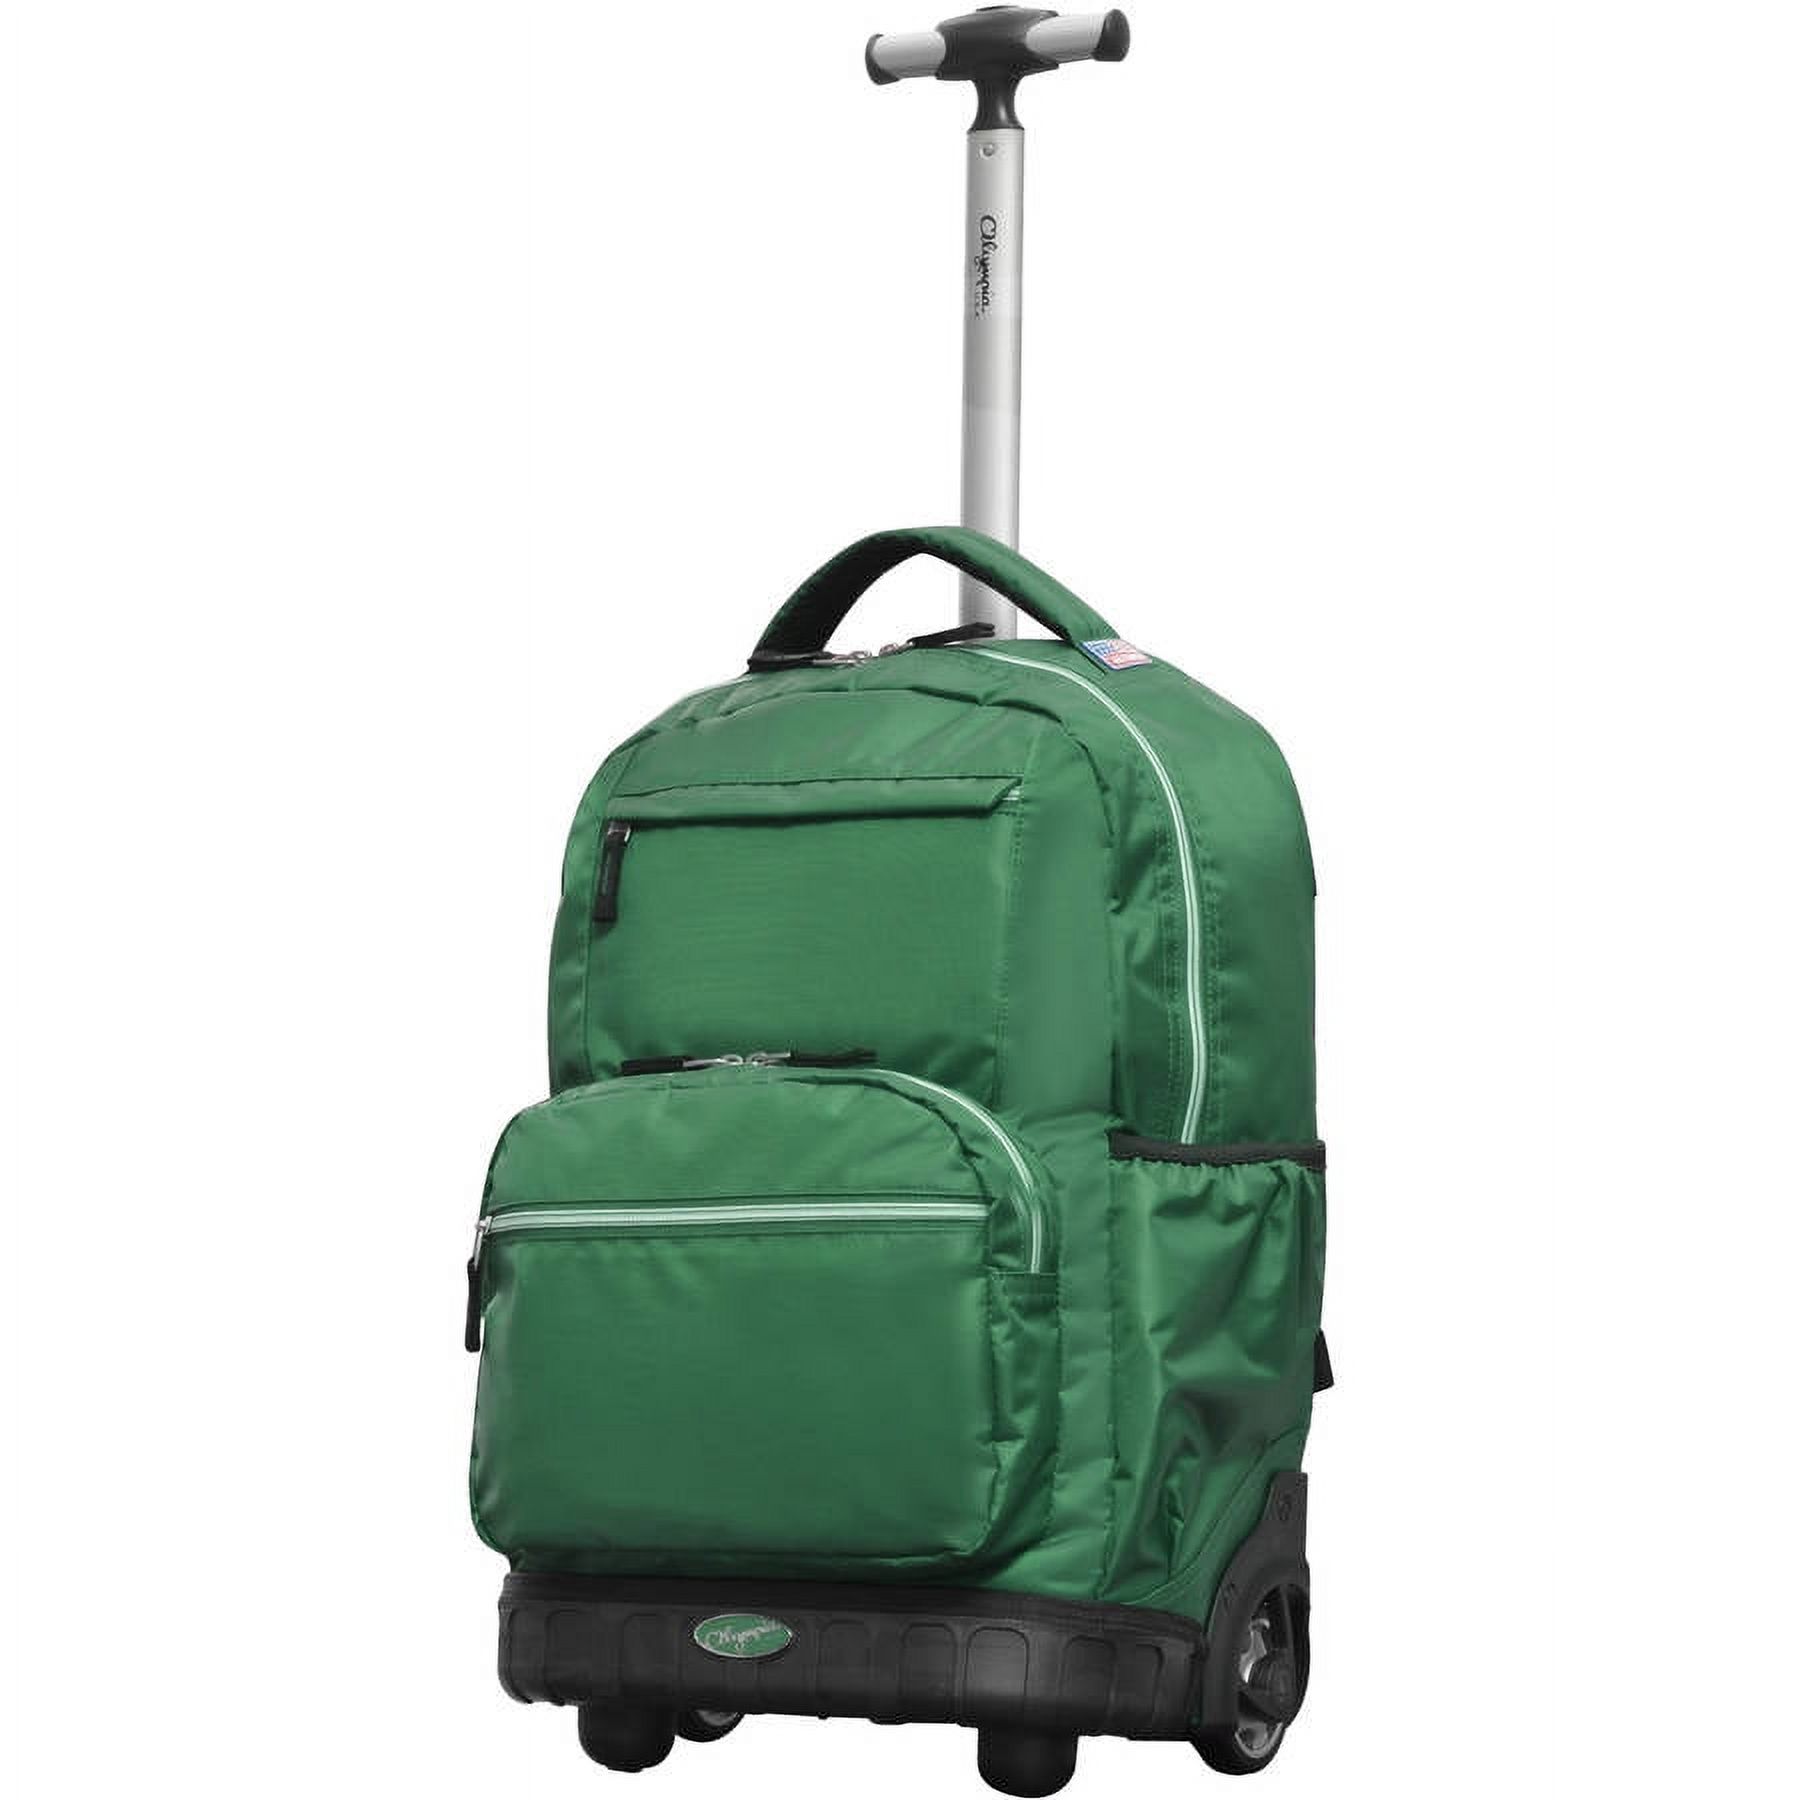 Melody 19 Rolling Backpack - image 1 of 10